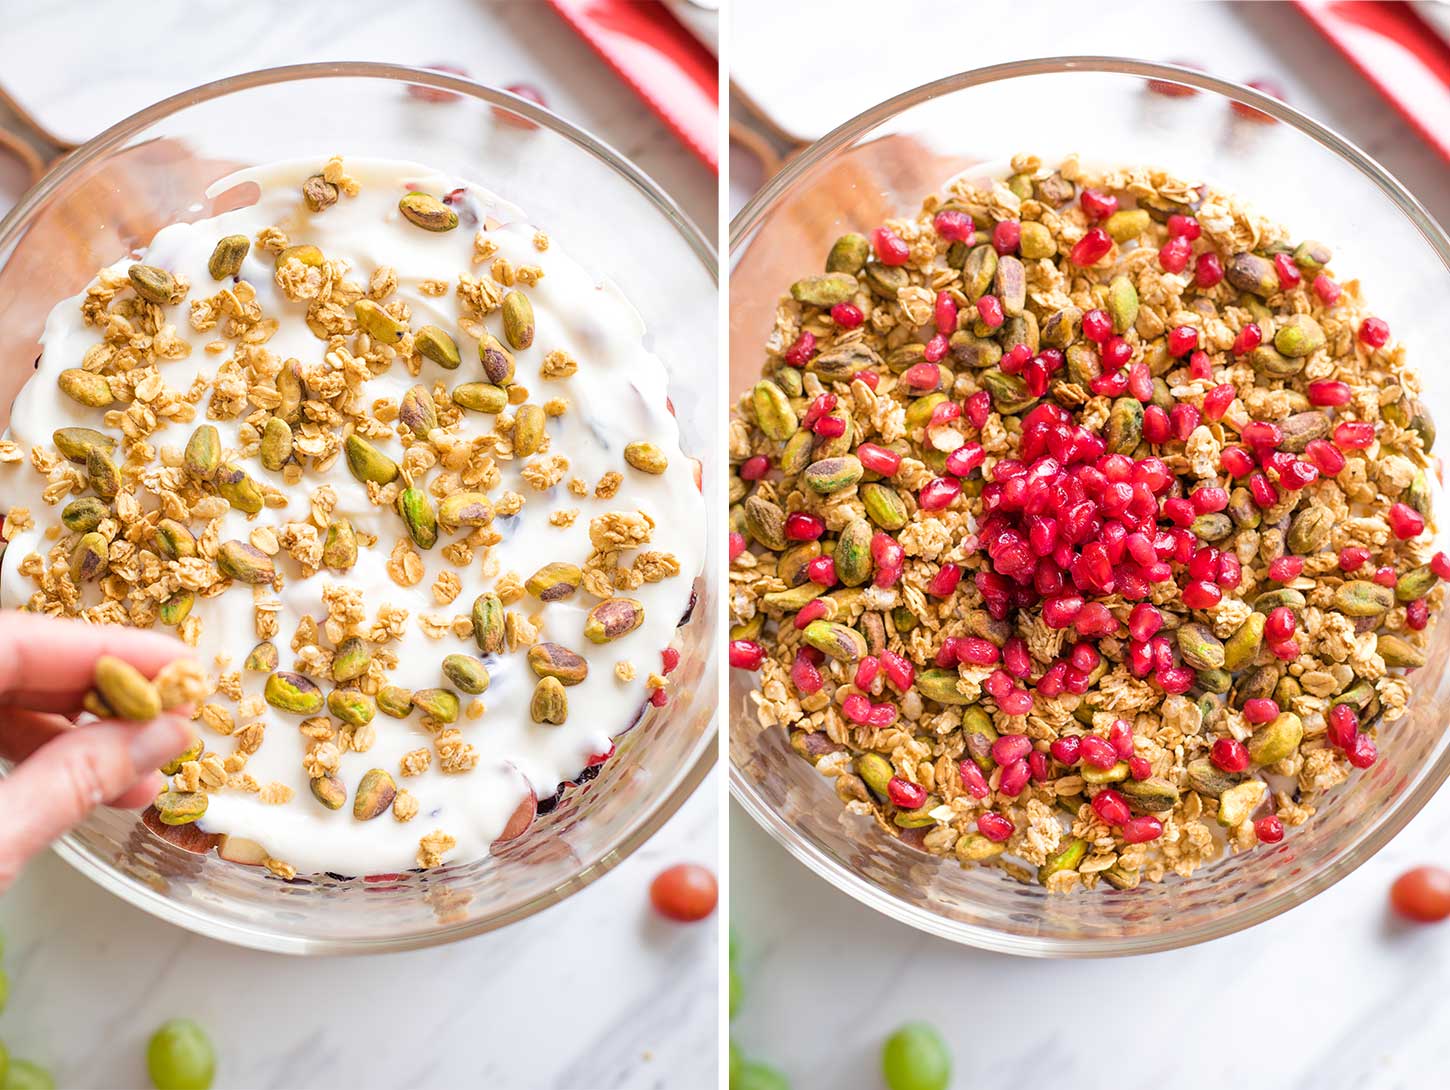 Collage of two overhead method photos, the first showing a hand just beginning to sprinkle pistachios and granola on the fruit salad, and the other showing the pomegranates on top of that.